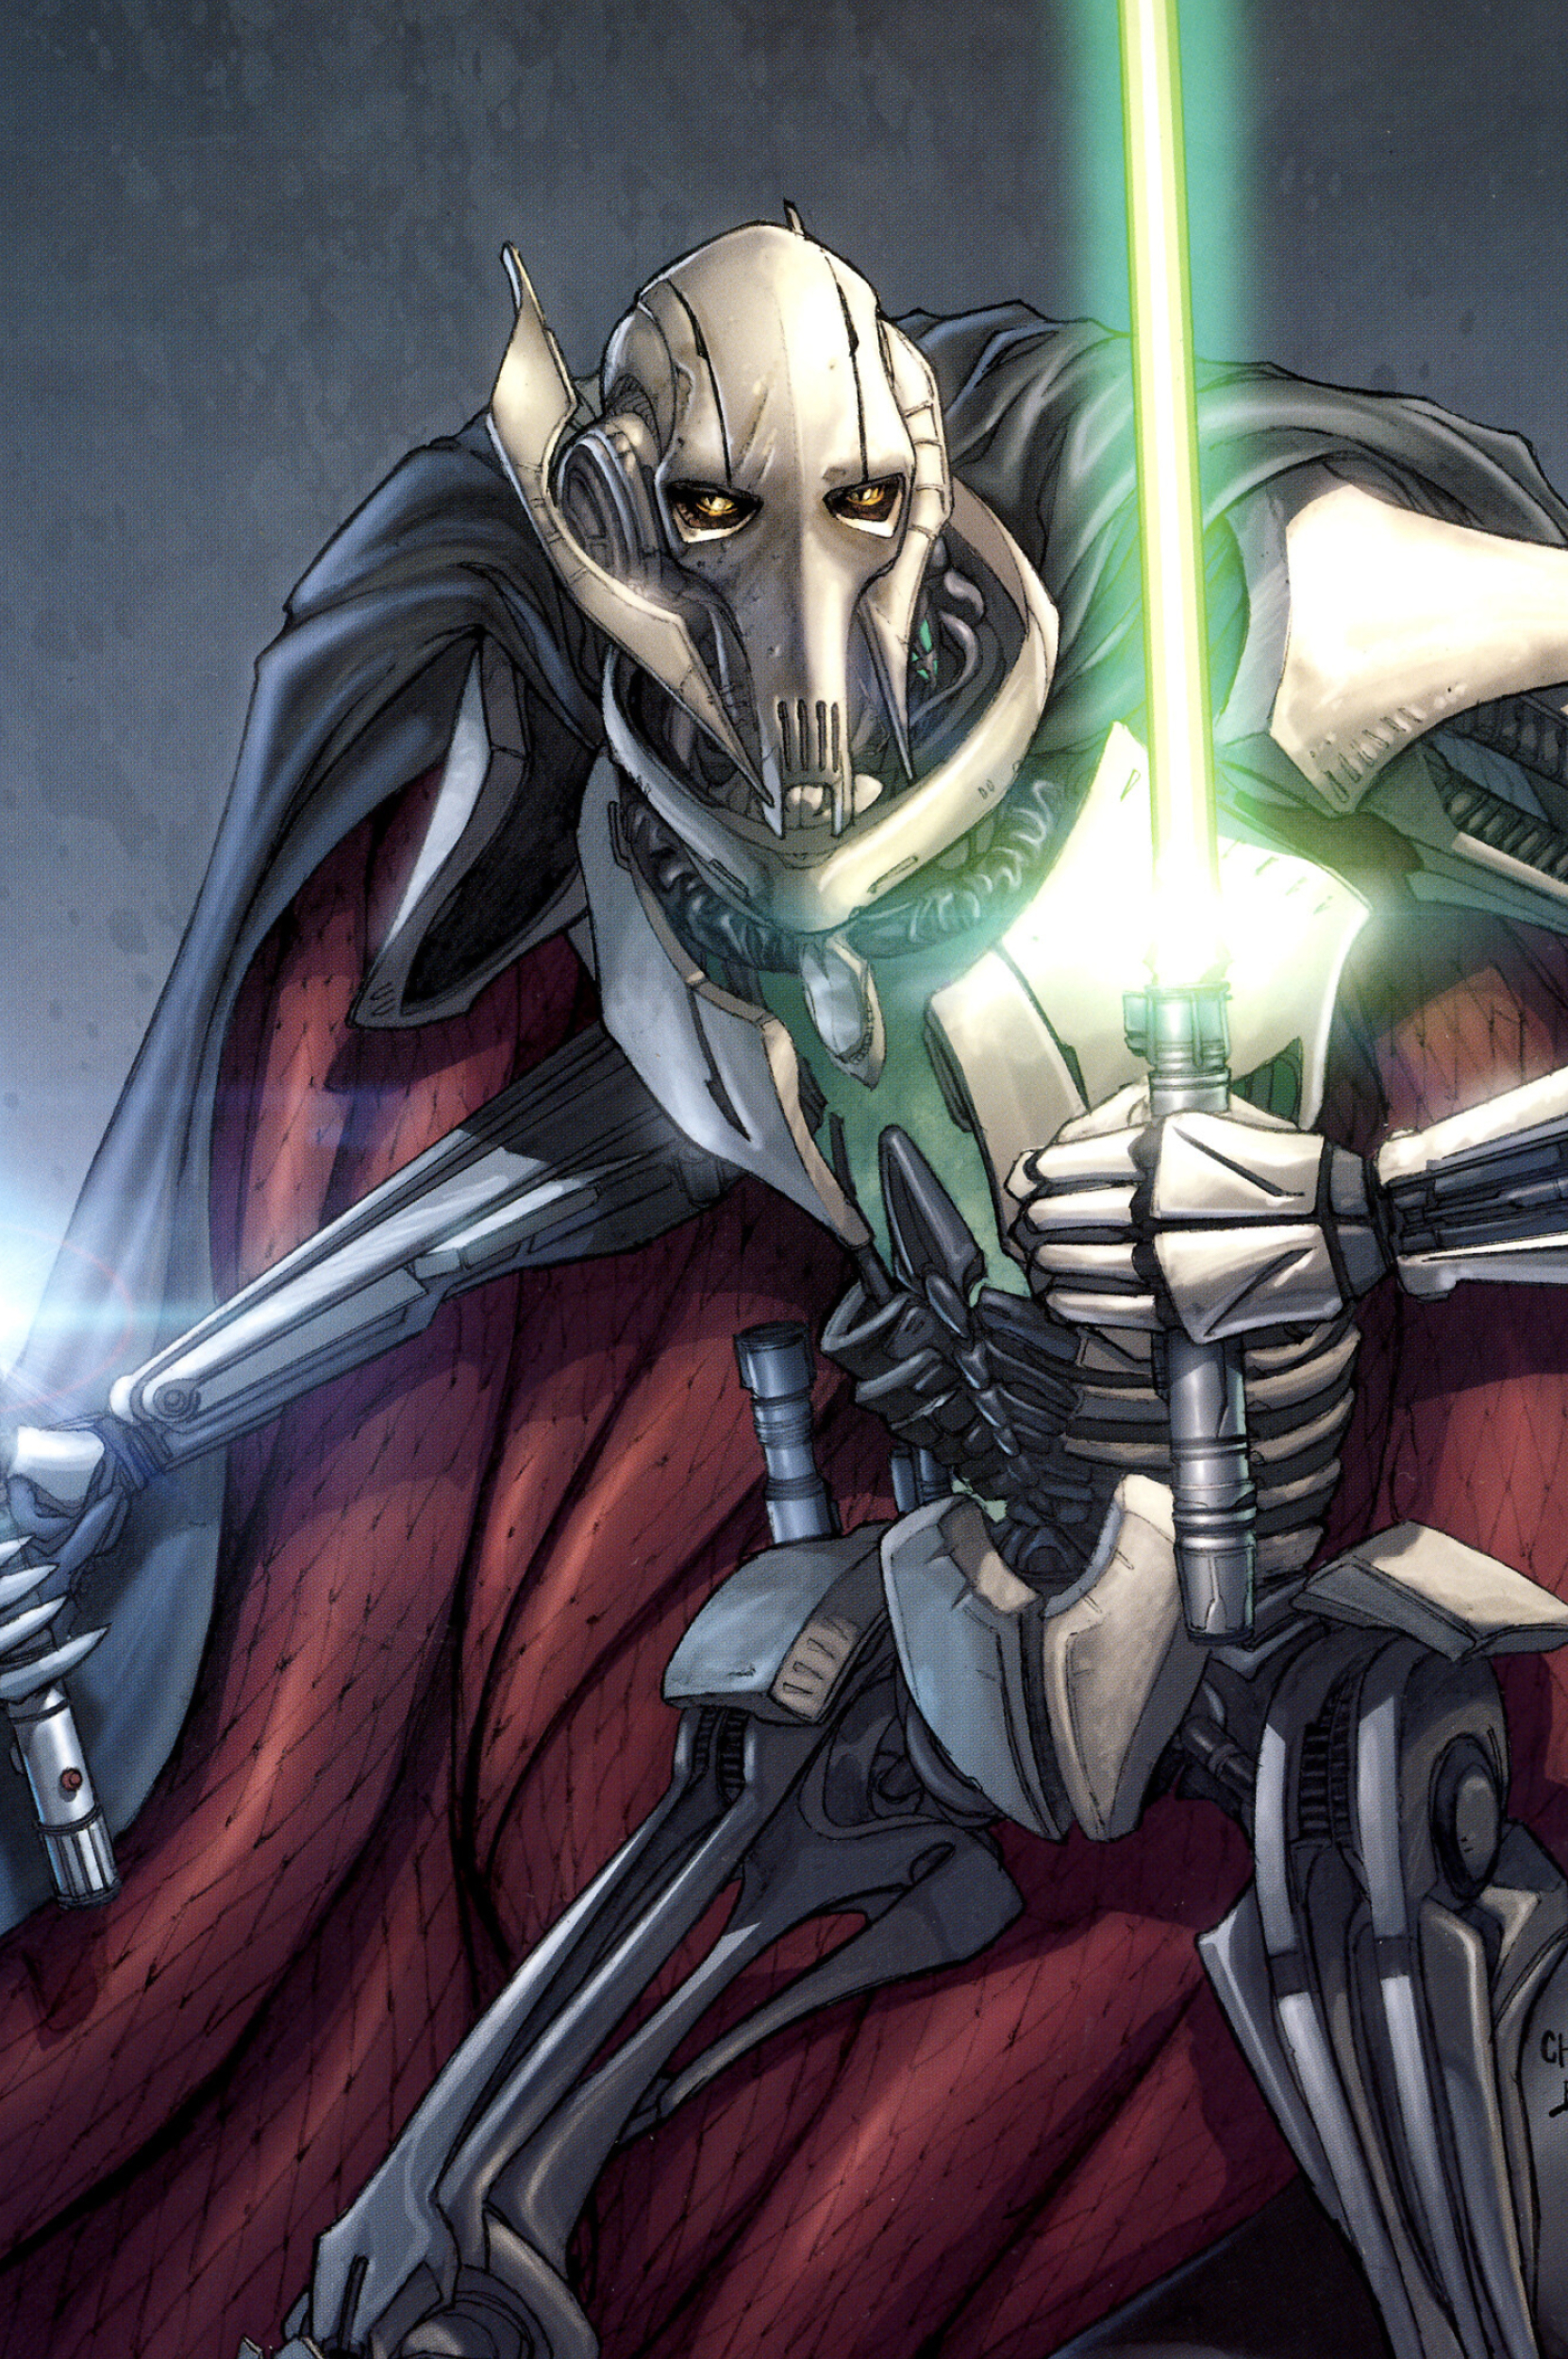 General Grievous: The famous Jedi hunting Cyborg, A feared warlord from the planet Kalee, Dominating his enemies in battle. 1670x2500 HD Wallpaper.